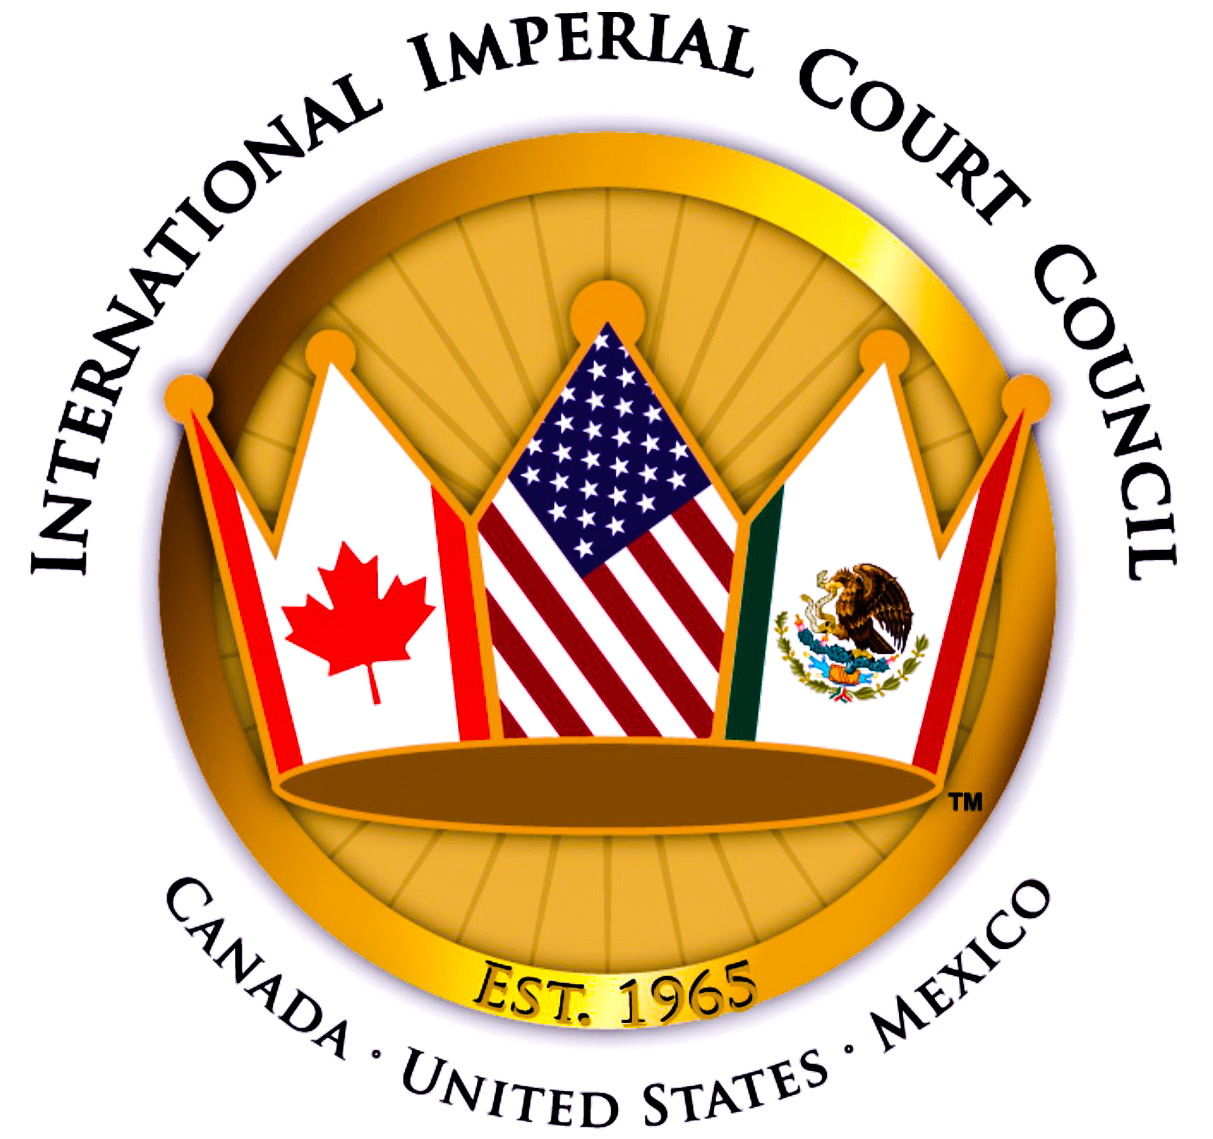 International Imperial Court System